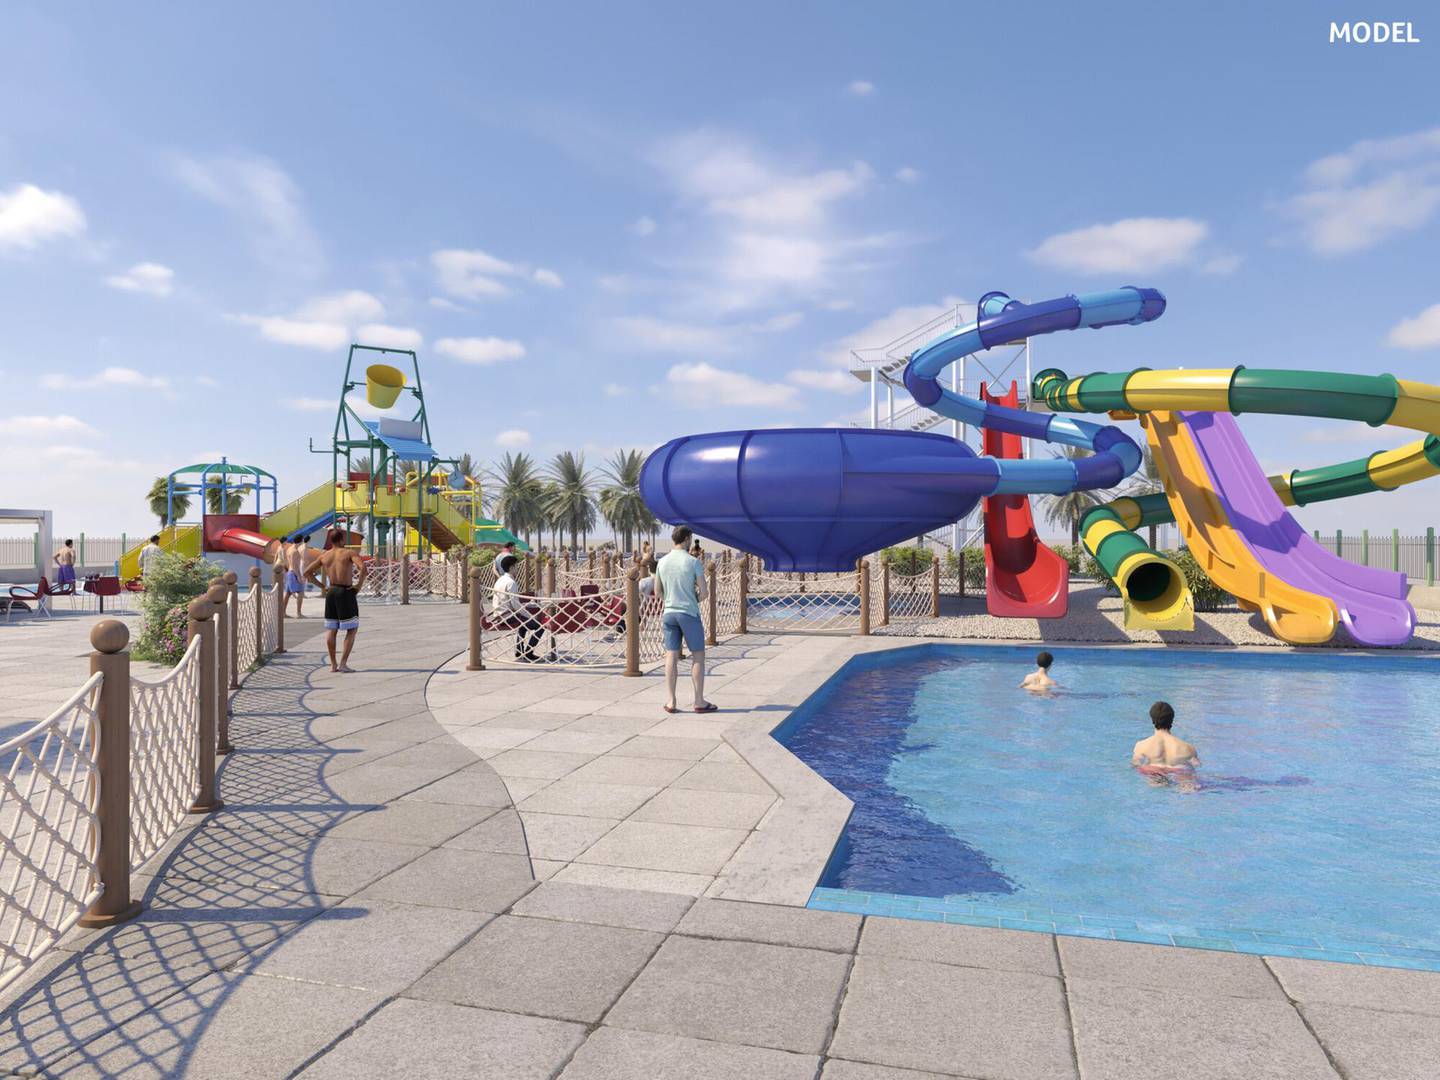 Guests staying at Hotel Riu Dubai will have free entry to Splash Water World water park. Courtesy Riu Hotels & Resorts